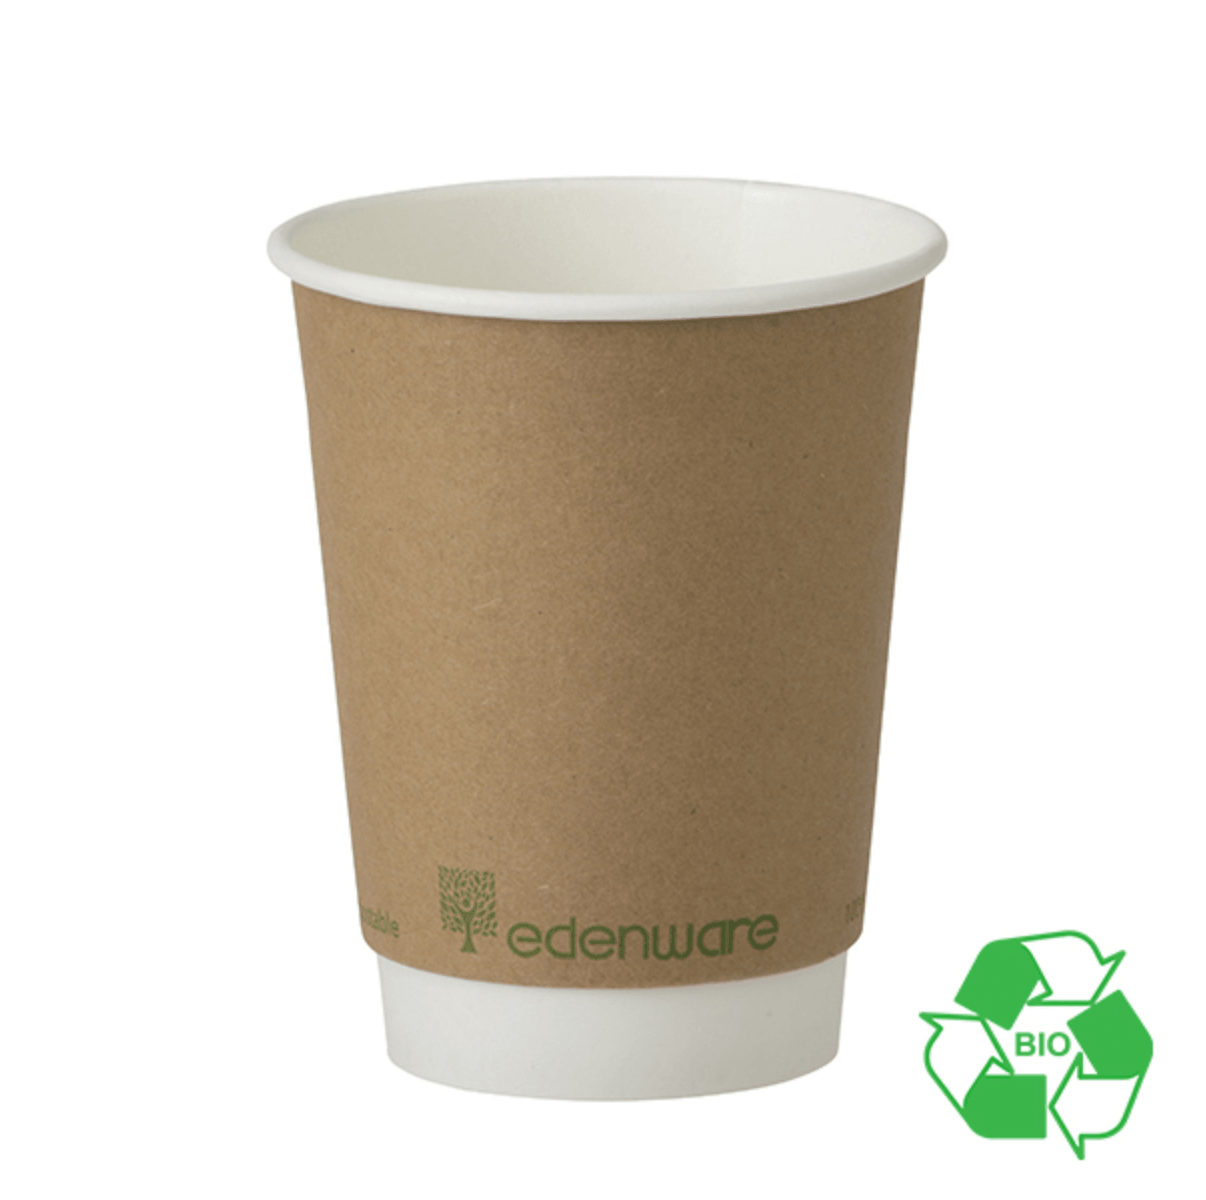 Edenware - 12oz Compostable Biodegradable Takeaway Coffee Cups, Kraft Double Walled (PLA LINED) - Case of 500 - Vending Superstore